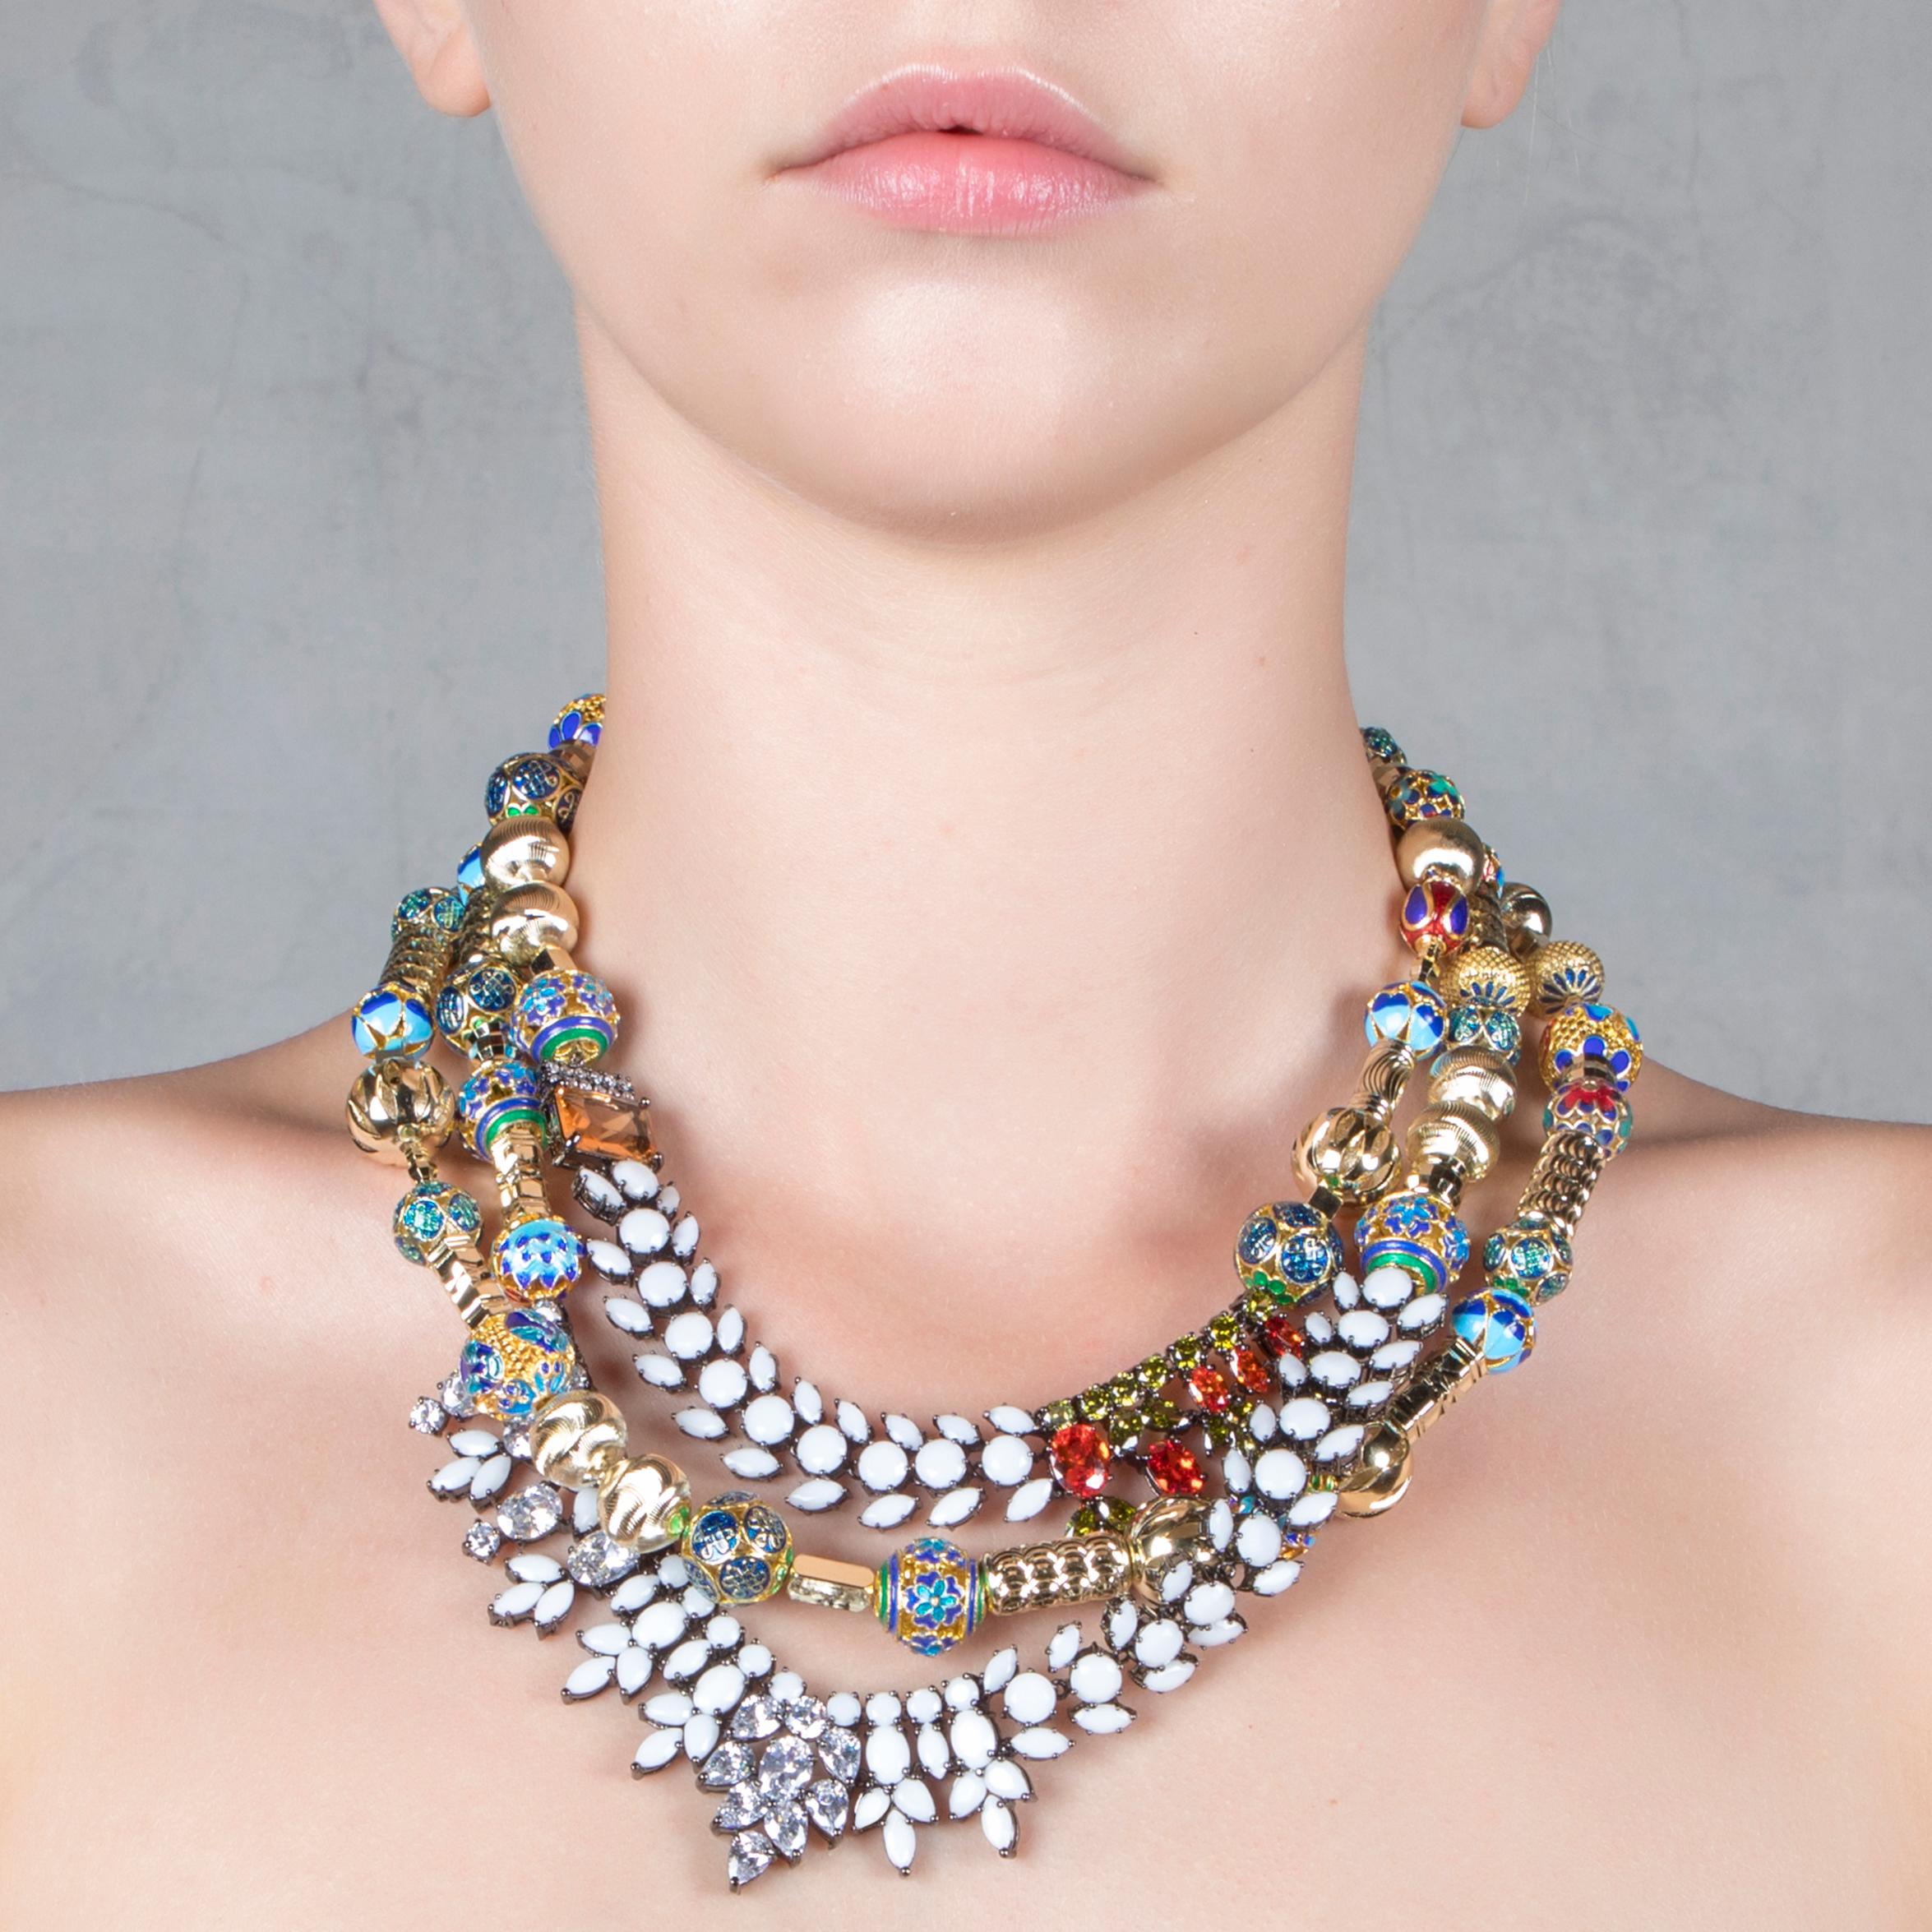 IOSSELLIANI's unique statement necklace is designed to blend some sense of tribal forms into a harmonious balance between elegance and extra impact. The custom made three tiered necklace is dotted with small enamel cloisonnèe beads alternate with 18